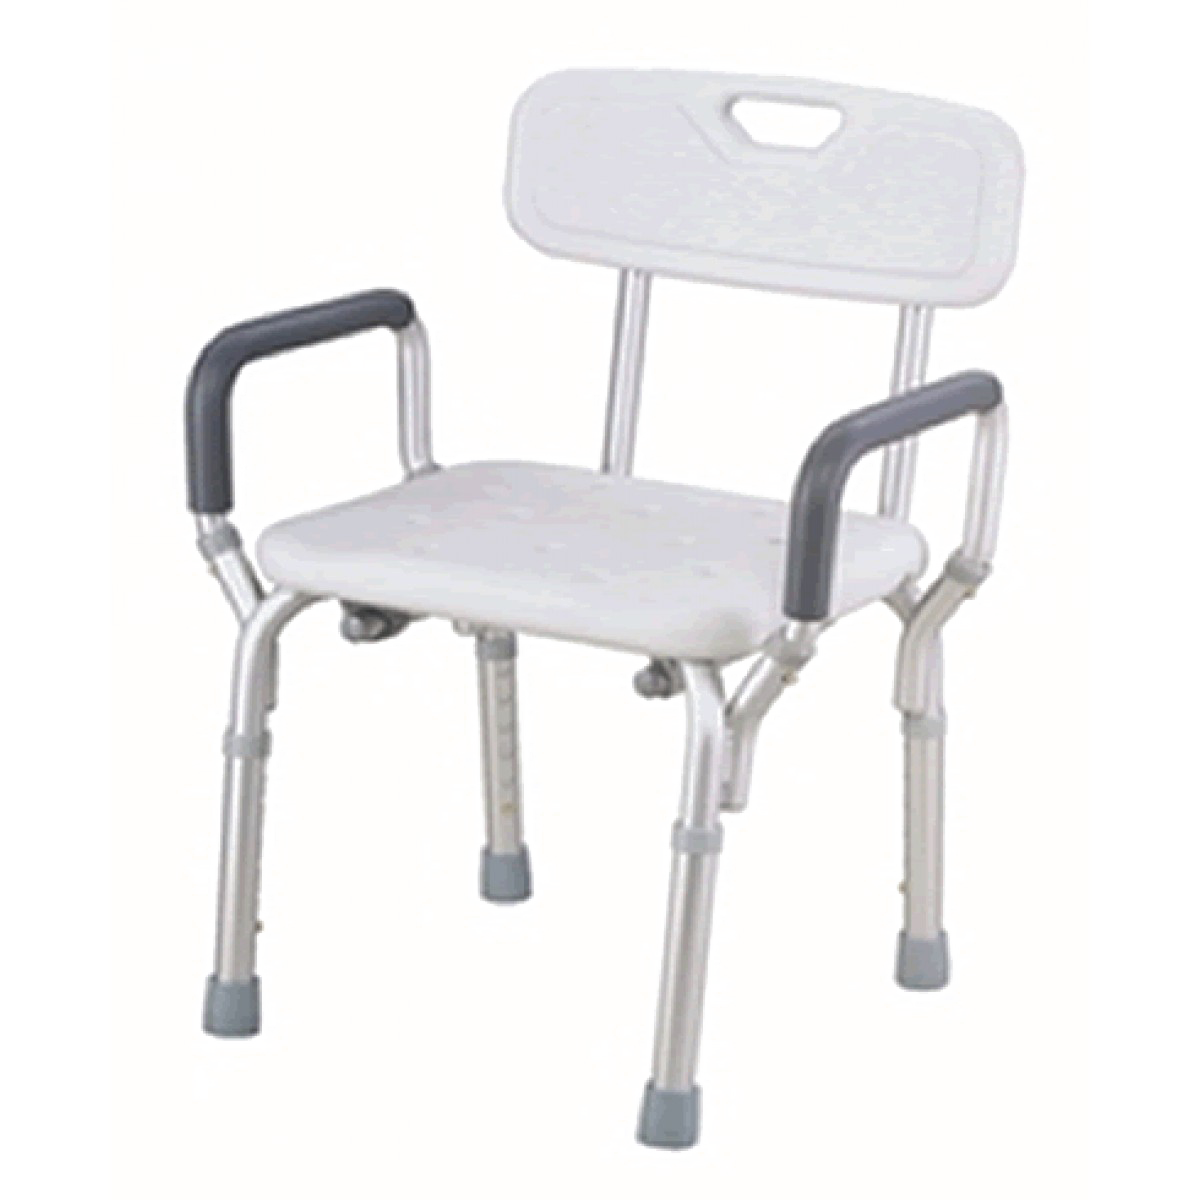 Bath Chair HQ Image Free PNG PNG Image